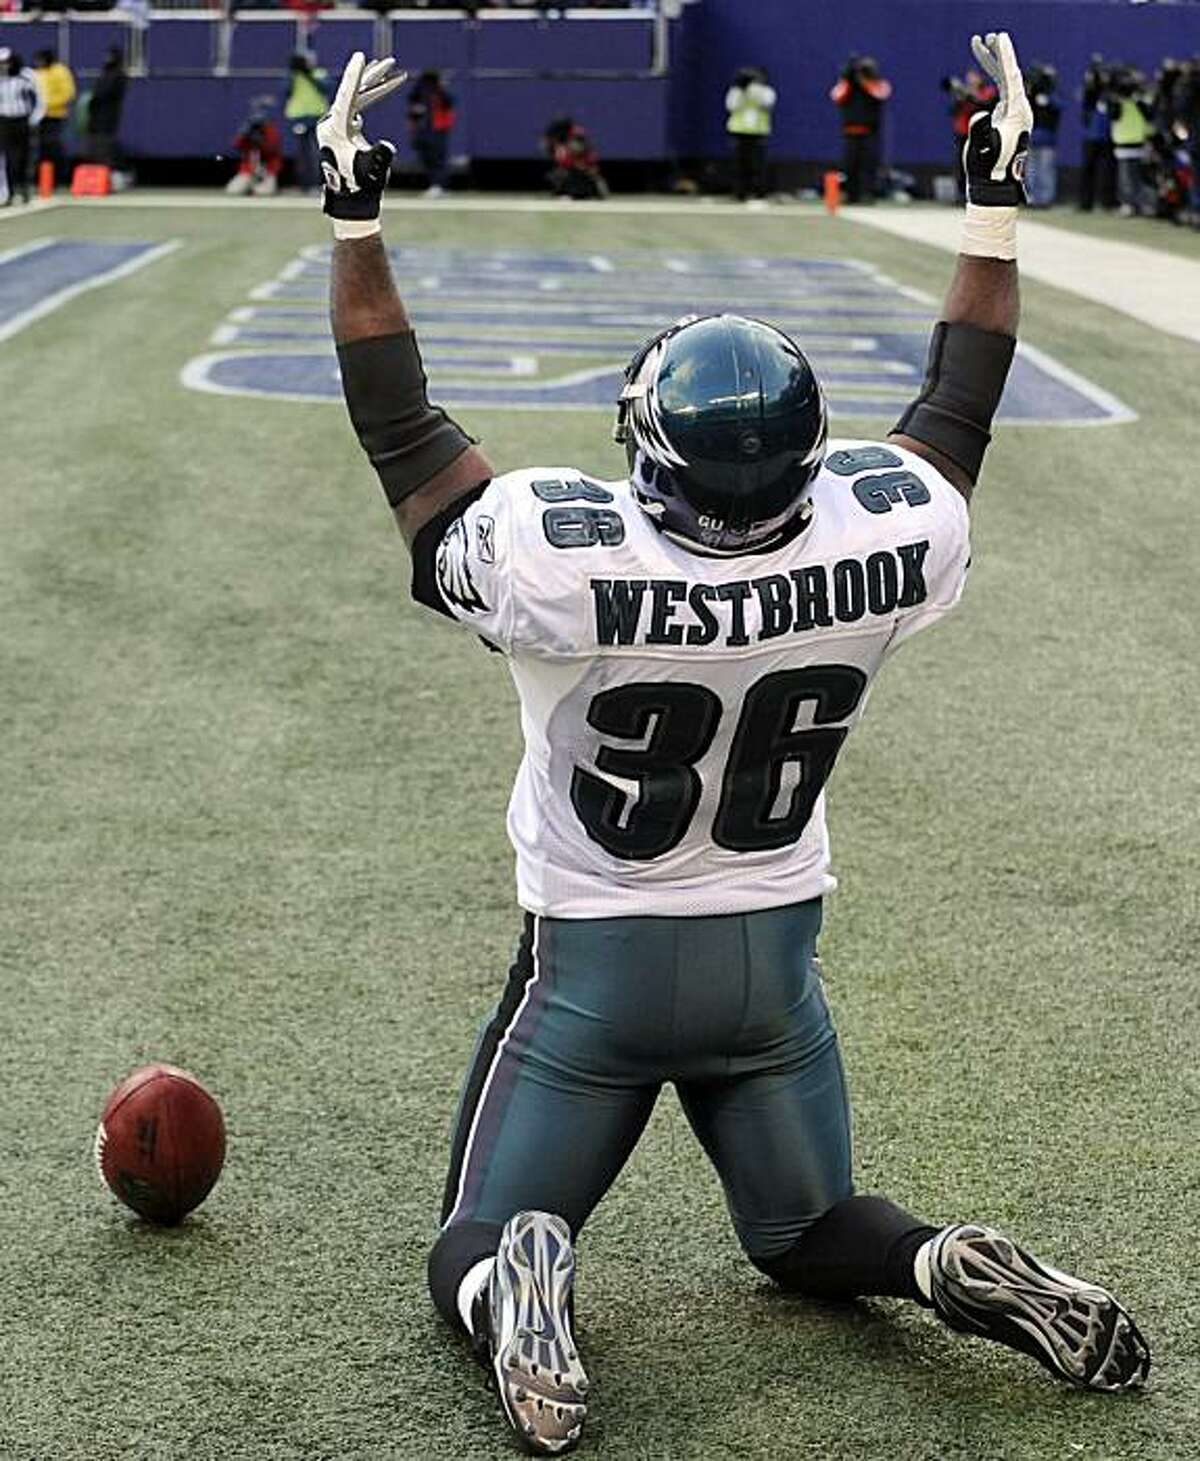 Philadelphia Eagles' Brian Westbrook reacts after scoring on a 40-yard touchdown pass during the fourth quarter of an NFL football game against the New York Giants Sunday, Dec. 7, 2008 at Giants Stadium in East Rutherford, N.J. The Eagles won 20-14. (AP Photo/Bill Kostroun)